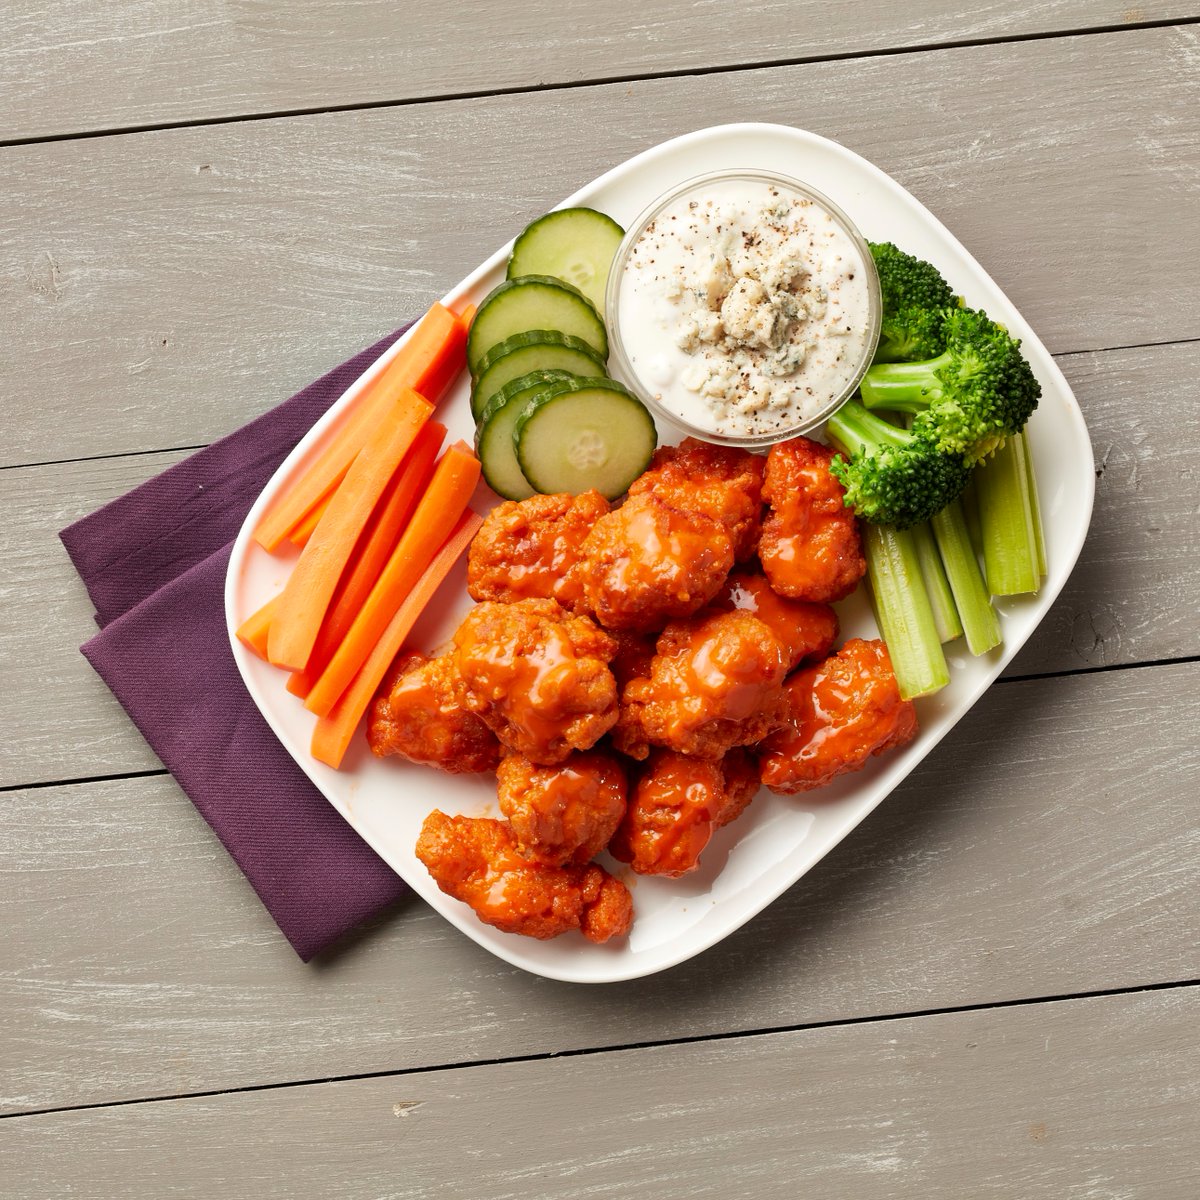 Wayne-Sanderson Farms is launching “Kosmic Krunch,” a new product line that utilizes a proprietary breading system for chicken chunks, tenders and strips to retain a crunchy texture for an extended amount of time! Read more: wayne-sanderson.com/3VKrxt0. #MakingChickenAmazing